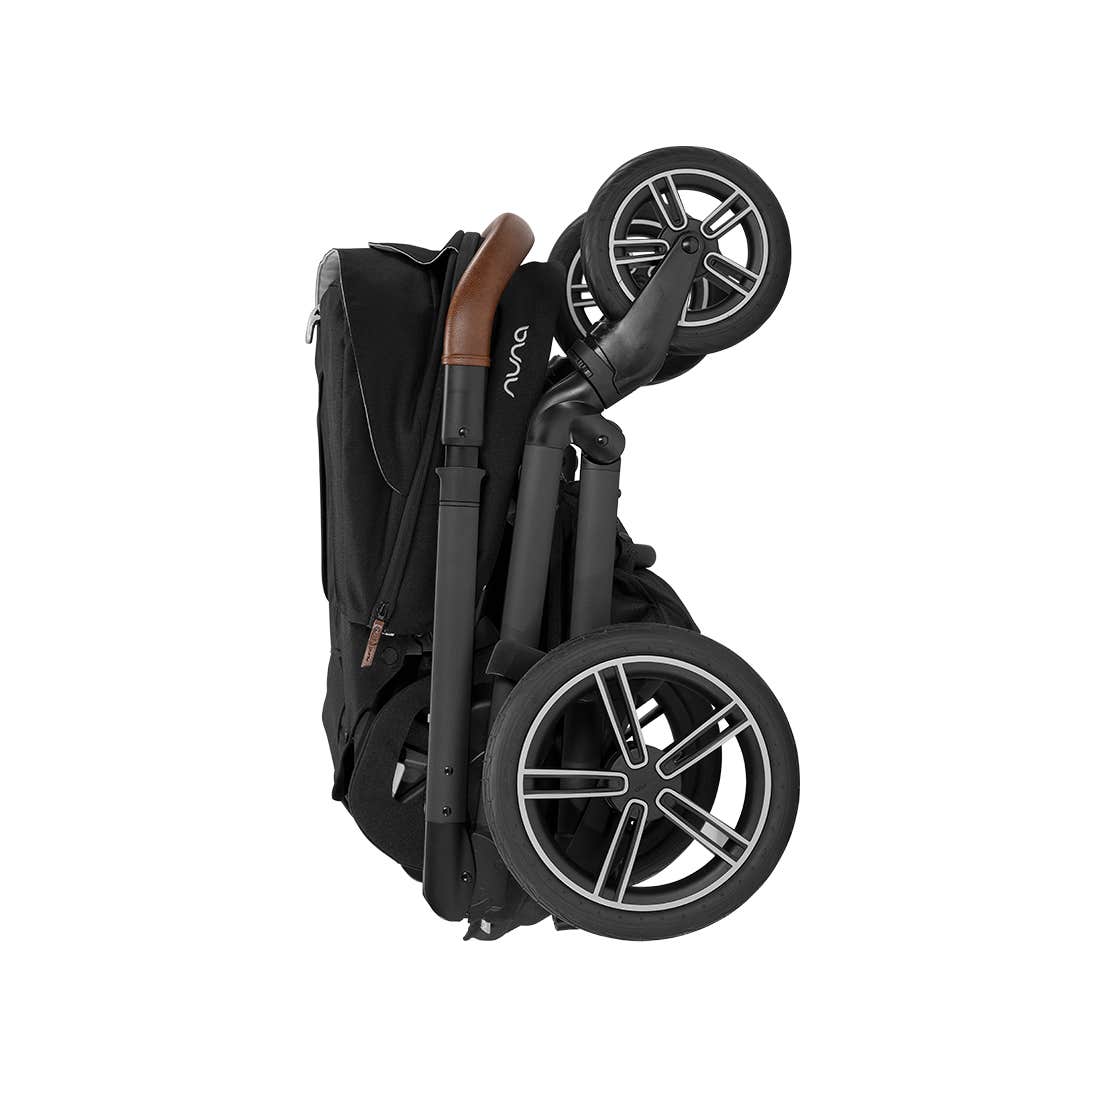 Nuna MIXX Next Stroller with Magnetic Buckle + Pipa RX, -- ANB Baby